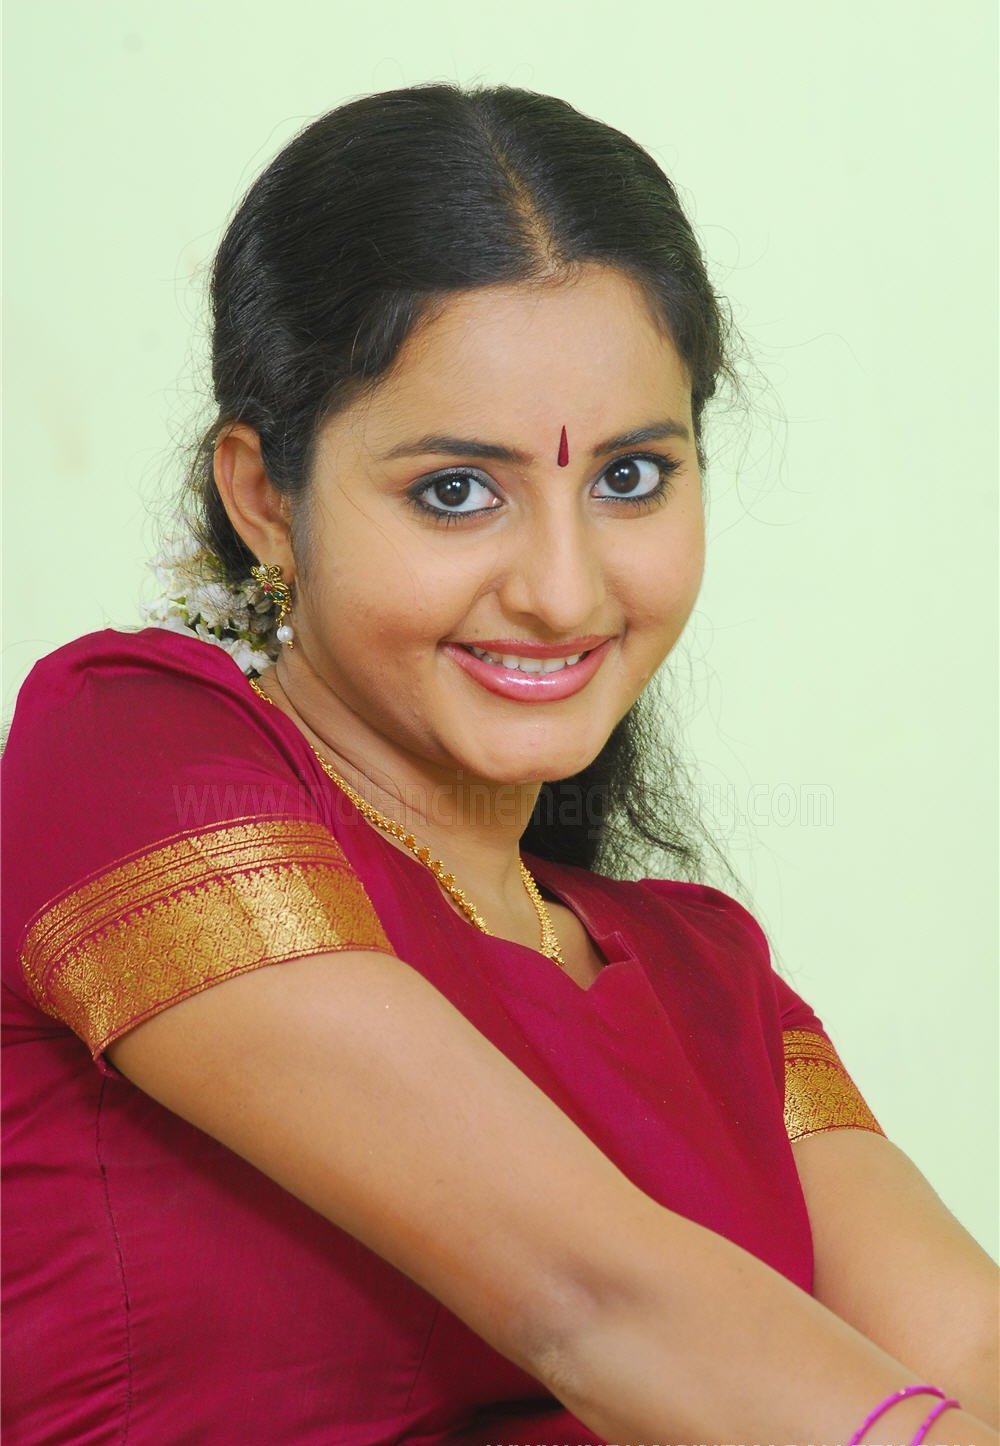 Hottest Bhama in Looking Hot in Red Dress